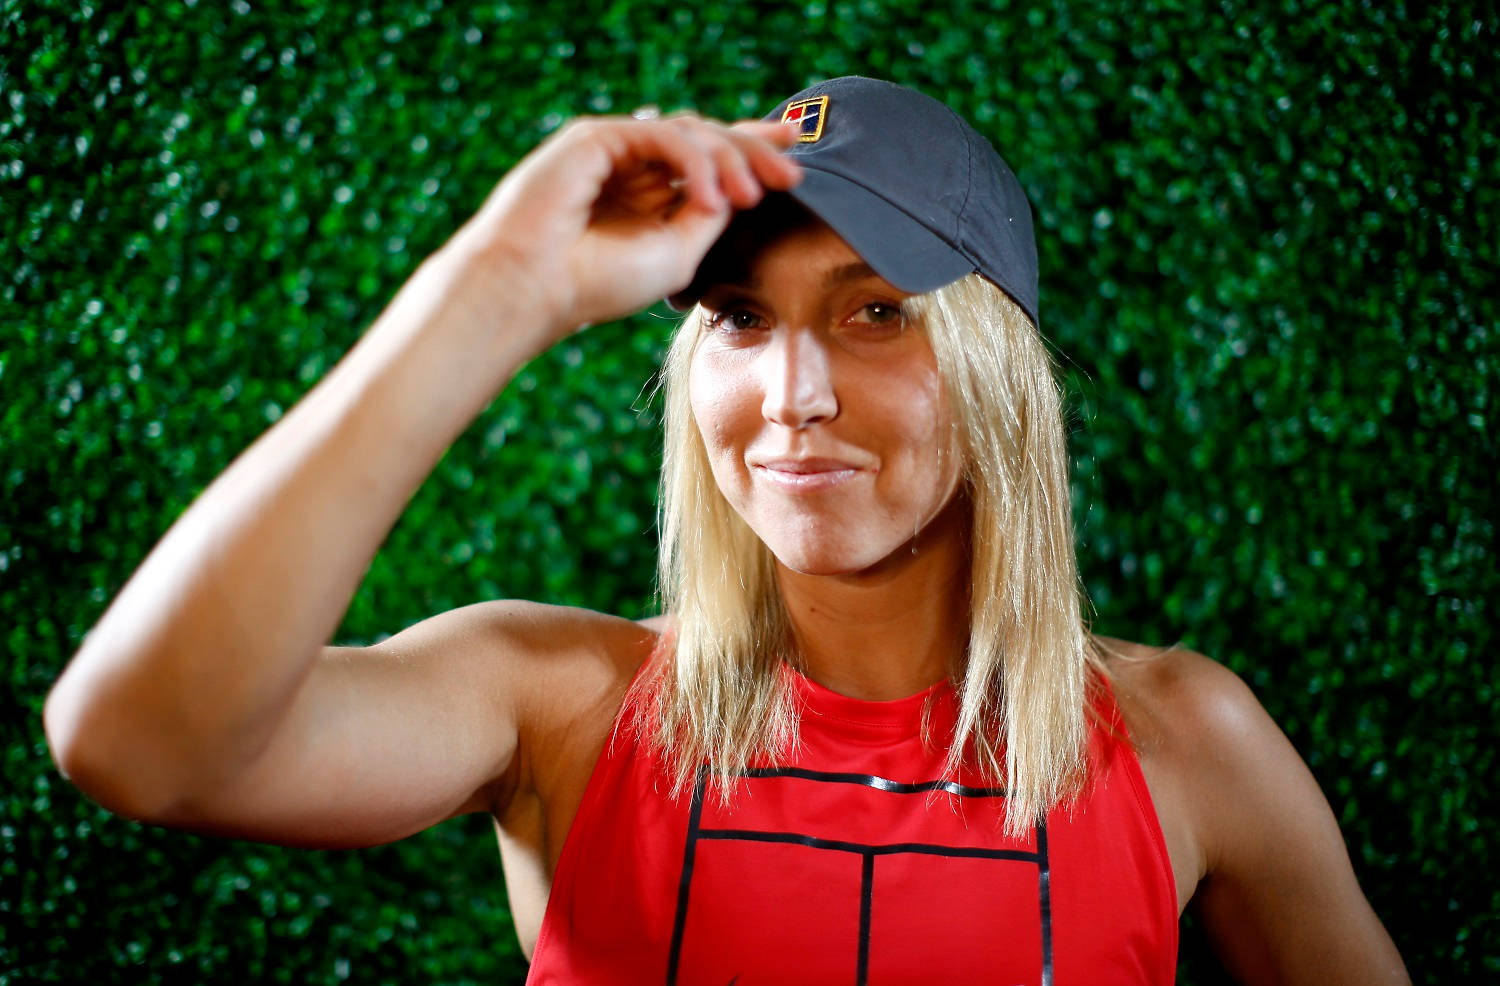 Elena Vesnina in form - Muscle focus with a Cap Wallpaper